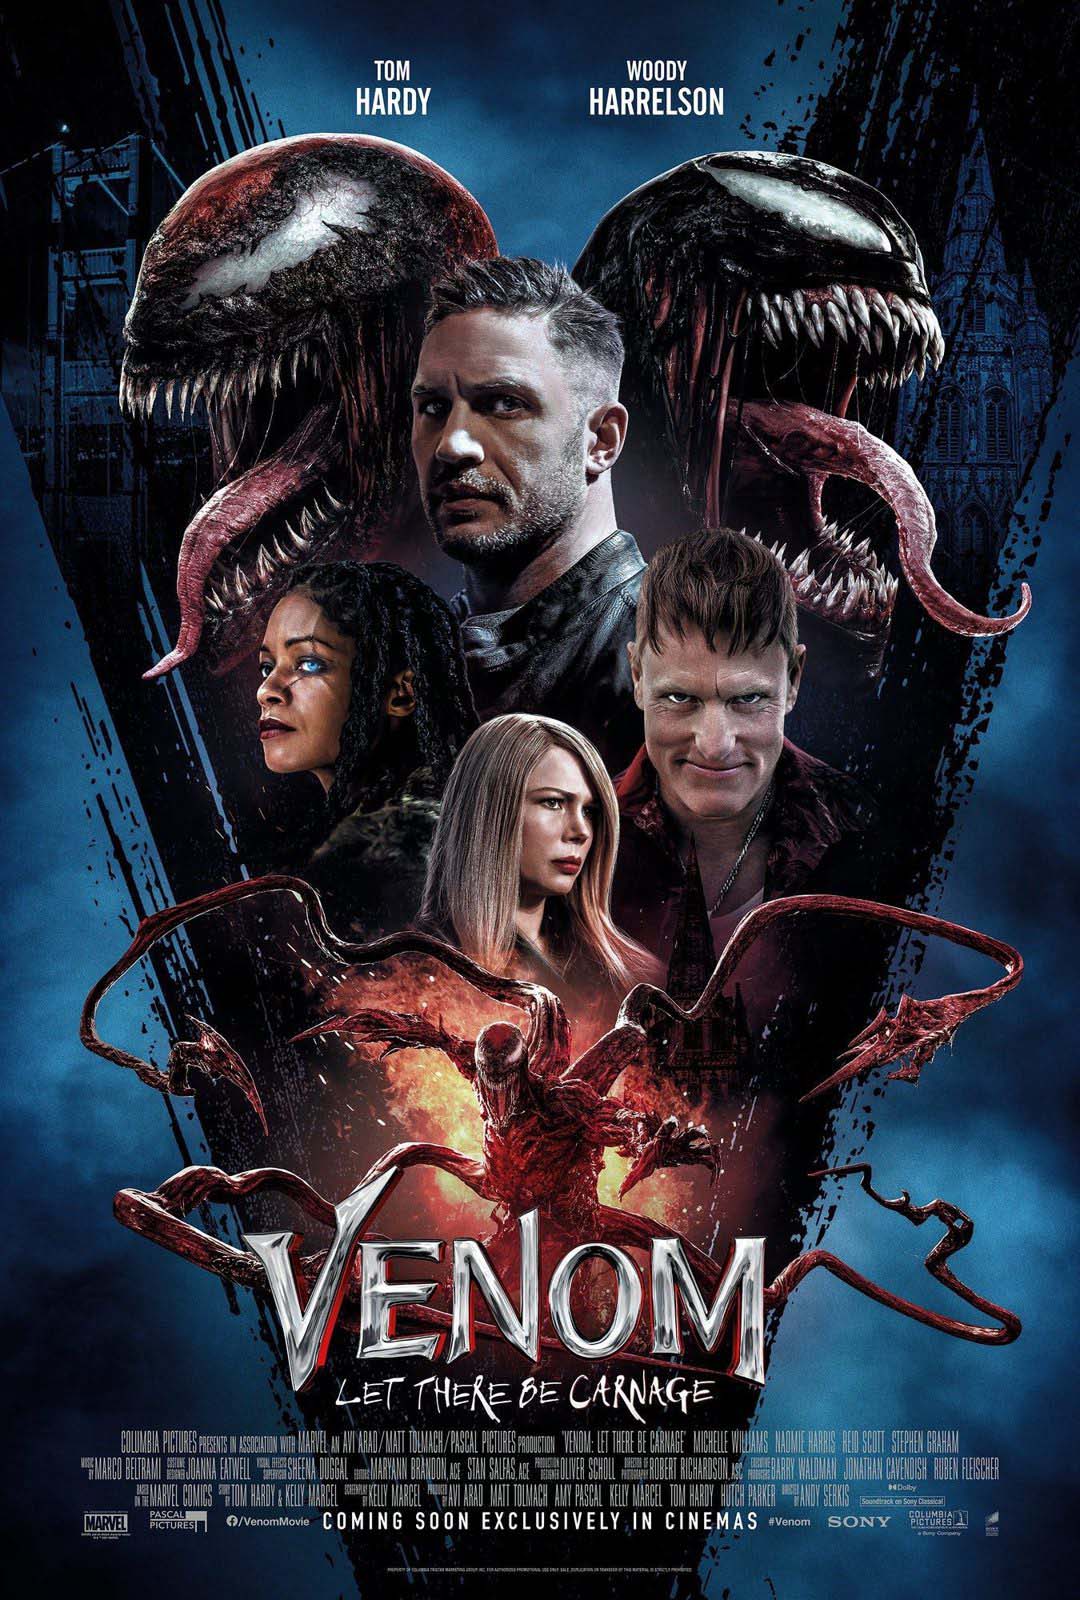 The Hit House's sound design in-Venom-Let There Be Carnage-Trailer-full